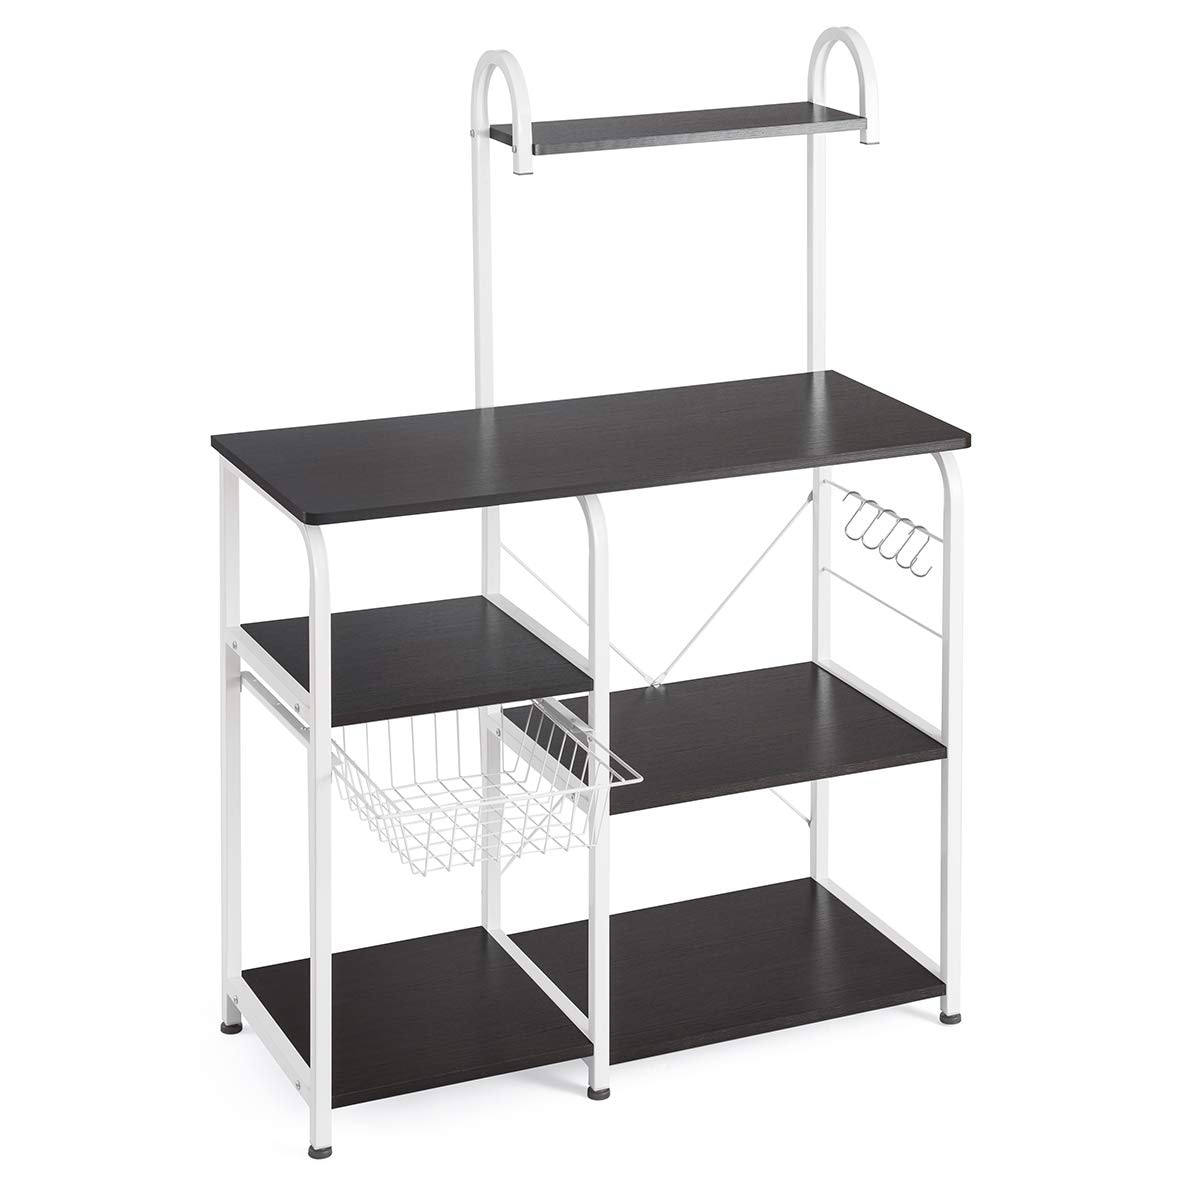 https://ak1.ostkcdn.com/images/products/is/images/direct/ba8dd4b91a24766146bee877096bce2ba5d6947c/35.5%22-Kitchen-Baker%27s-Rack-Utility-Storage-Shelf-Microwave-Stand-Workstation-with-10-Hooks%284-Tier%29.jpg